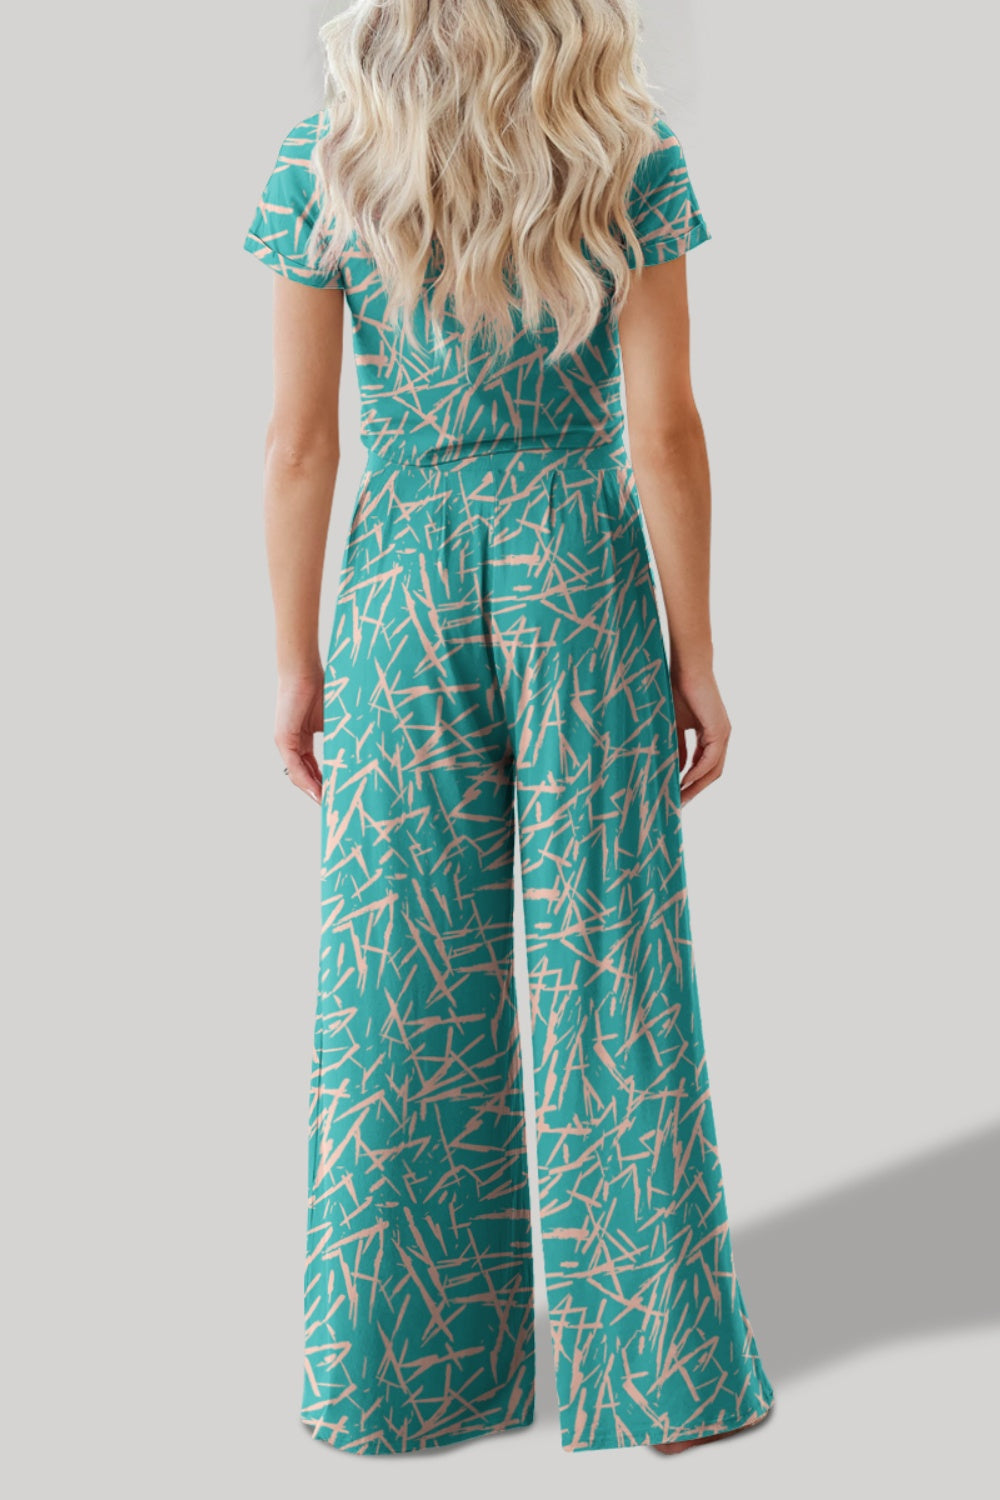 Chic teal printed top and pants set. Versatile, comfortable, and perfect for any occasion. Stand out with effortless style